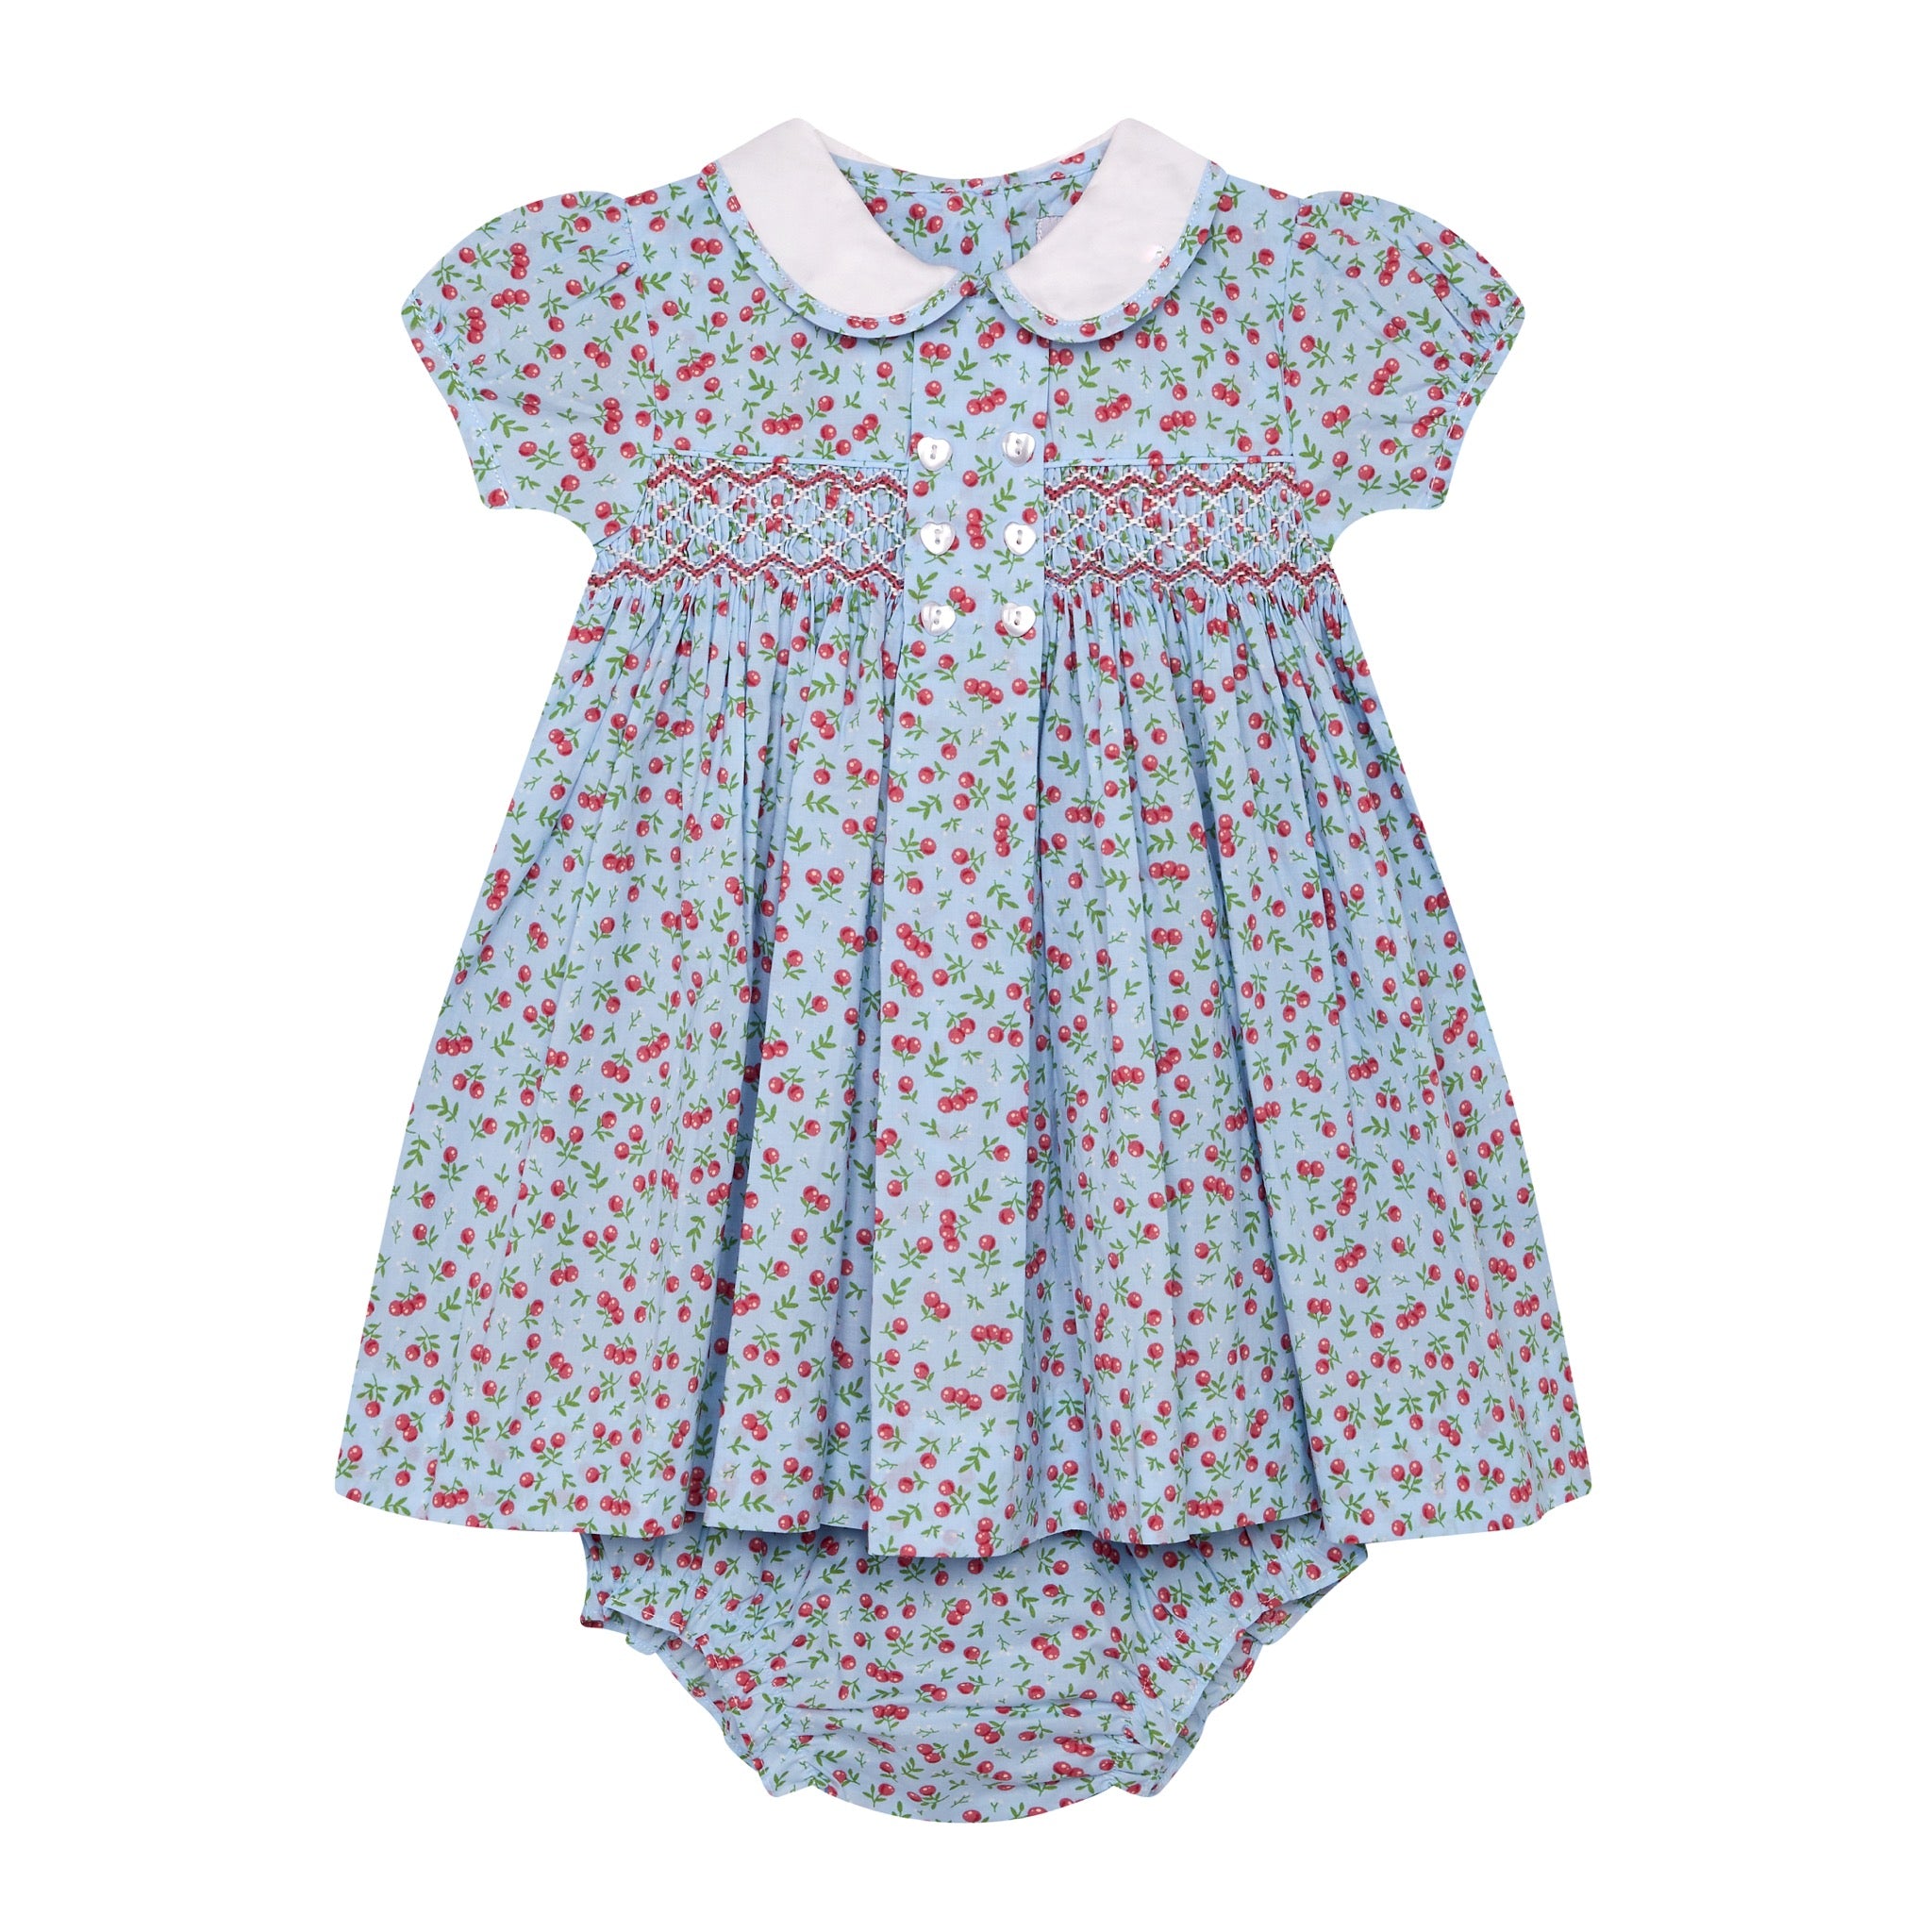 cherry print dress for baby, white collar, smocked, front